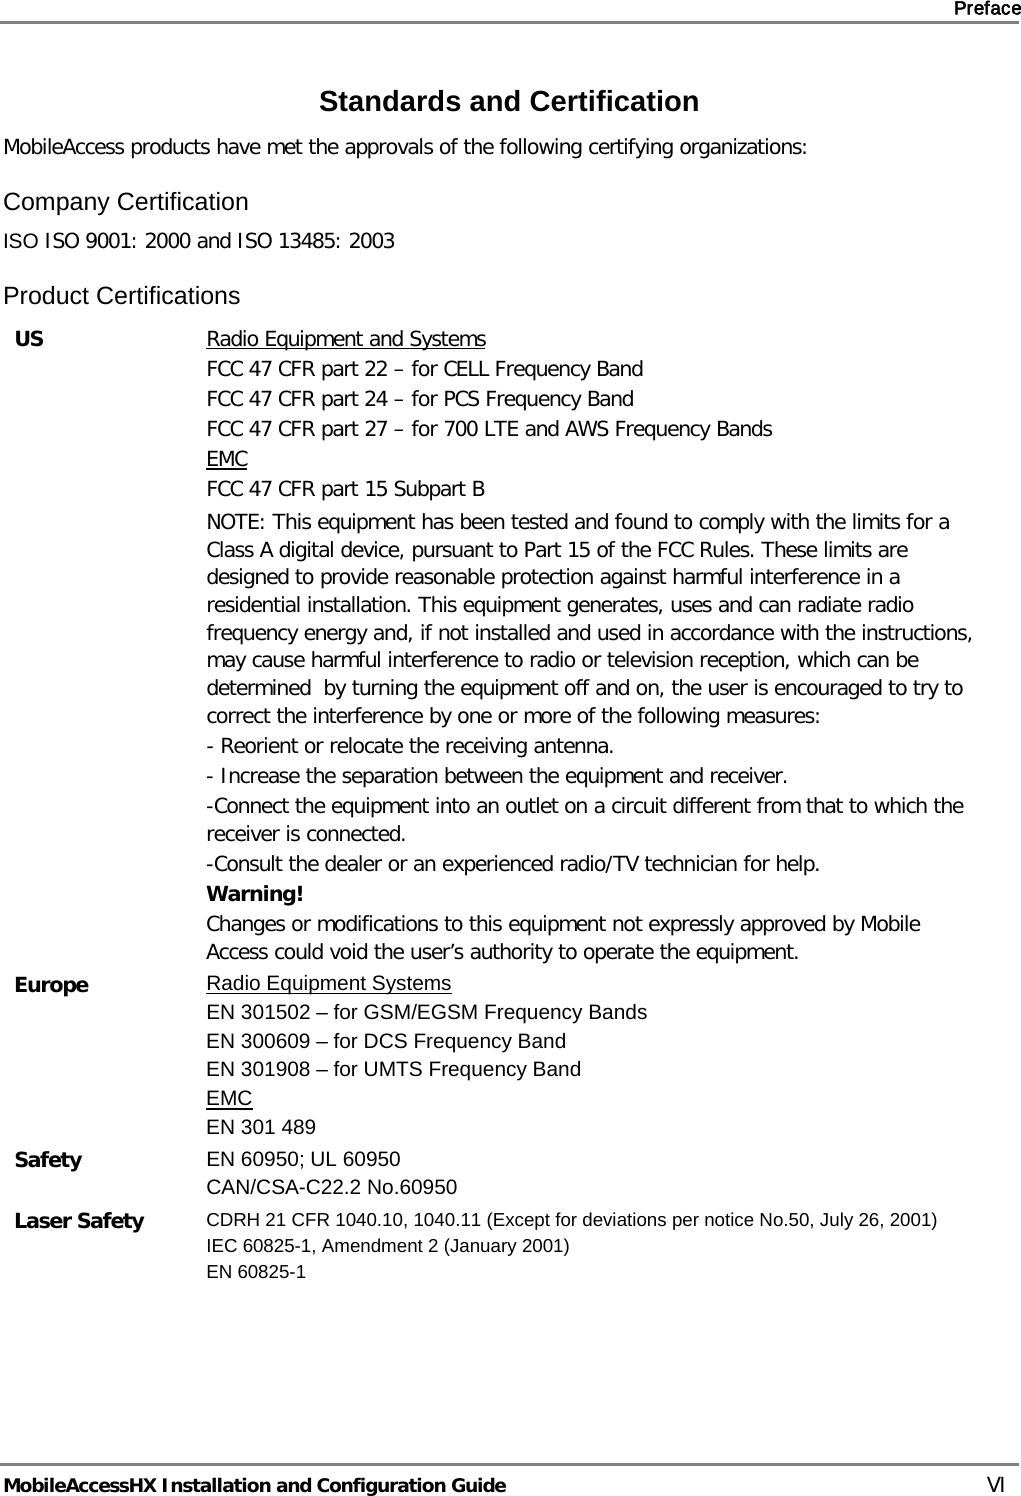     Preface       MobileAccessHX Installation and Configuration Guide   VI Standards and Certification MobileAccess products have met the approvals of the following certifying organizations: Company Certification ISO ISO 9001: 2000 and ISO 13485: 2003 Product Certifications US Radio Equipment and Systems FCC 47 CFR part 22 – for CELL Frequency Band FCC 47 CFR part 24 – for PCS Frequency Band FCC 47 CFR part 27 – for 700 LTE and AWS Frequency Bands EMC FCC 47 CFR part 15 Subpart B   NOTE: This equipment has been tested and found to comply with the limits for a Class A digital device, pursuant to Part 15 of the FCC Rules. These limits are designed to provide reasonable protection against harmful interference in a residential installation. This equipment generates, uses and can radiate radio frequency energy and, if not installed and used in accordance with the instructions, may cause harmful interference to radio or television reception, which can be determined  by turning the equipment off and on, the user is encouraged to try to correct the interference by one or more of the following measures: - Reorient or relocate the receiving antenna. - Increase the separation between the equipment and receiver. -Connect the equipment into an outlet on a circuit different from that to which the receiver is connected. -Consult the dealer or an experienced radio/TV technician for help. Warning! Changes or modifications to this equipment not expressly approved by Mobile Access could void the user’s authority to operate the equipment. Europe Radio Equipment Systems EN 301502 – for GSM/EGSM Frequency Bands EN 300609 – for DCS Frequency Band EN 301908 – for UMTS Frequency Band EMC EN 301 489 Safety EN 60950; UL 60950 CAN/CSA-C22.2 No.60950 Laser Safety  CDRH 21 CFR 1040.10, 1040.11 (Except for deviations per notice No.50, July 26, 2001) IEC 60825-1, Amendment 2 (January 2001) EN 60825-1   